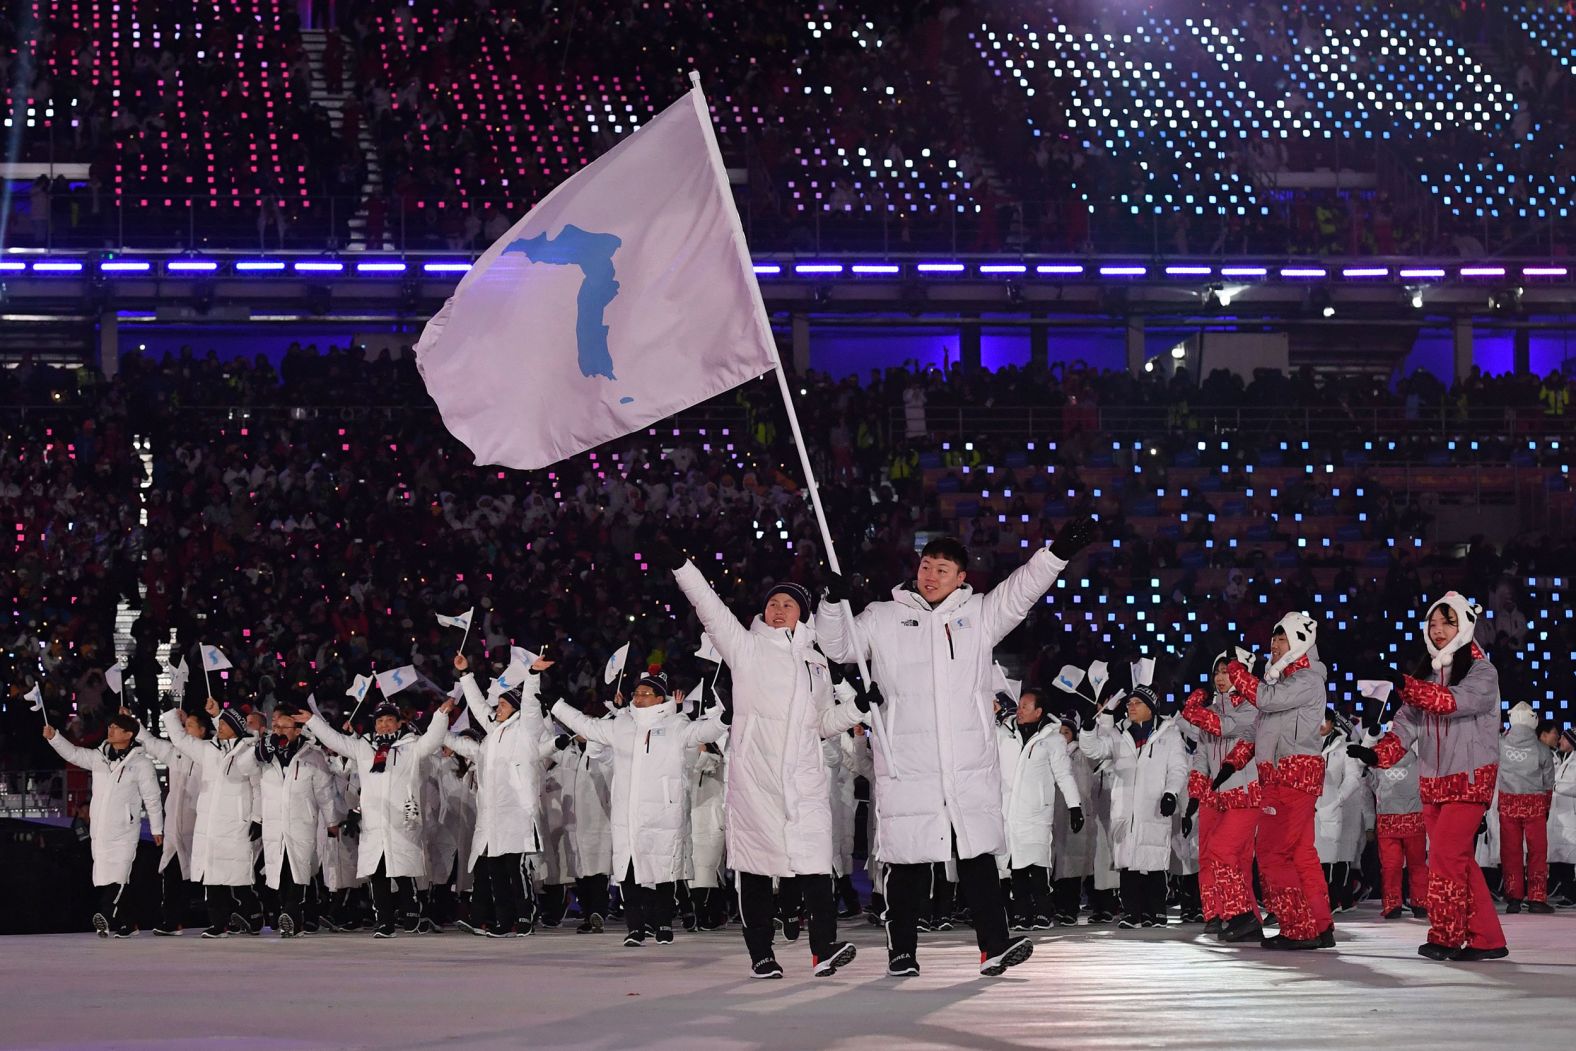 Athletes from North and South Korea marched together and waved flags of a unified Korea during the opening ceremony that took place in Pyeongchang, South Korea, in 2018. The two countries had marched together only three other times in Olympic history. During the Pyeongchang Games, athletes from both countries also teamed up to play for a unified women's hockey team.